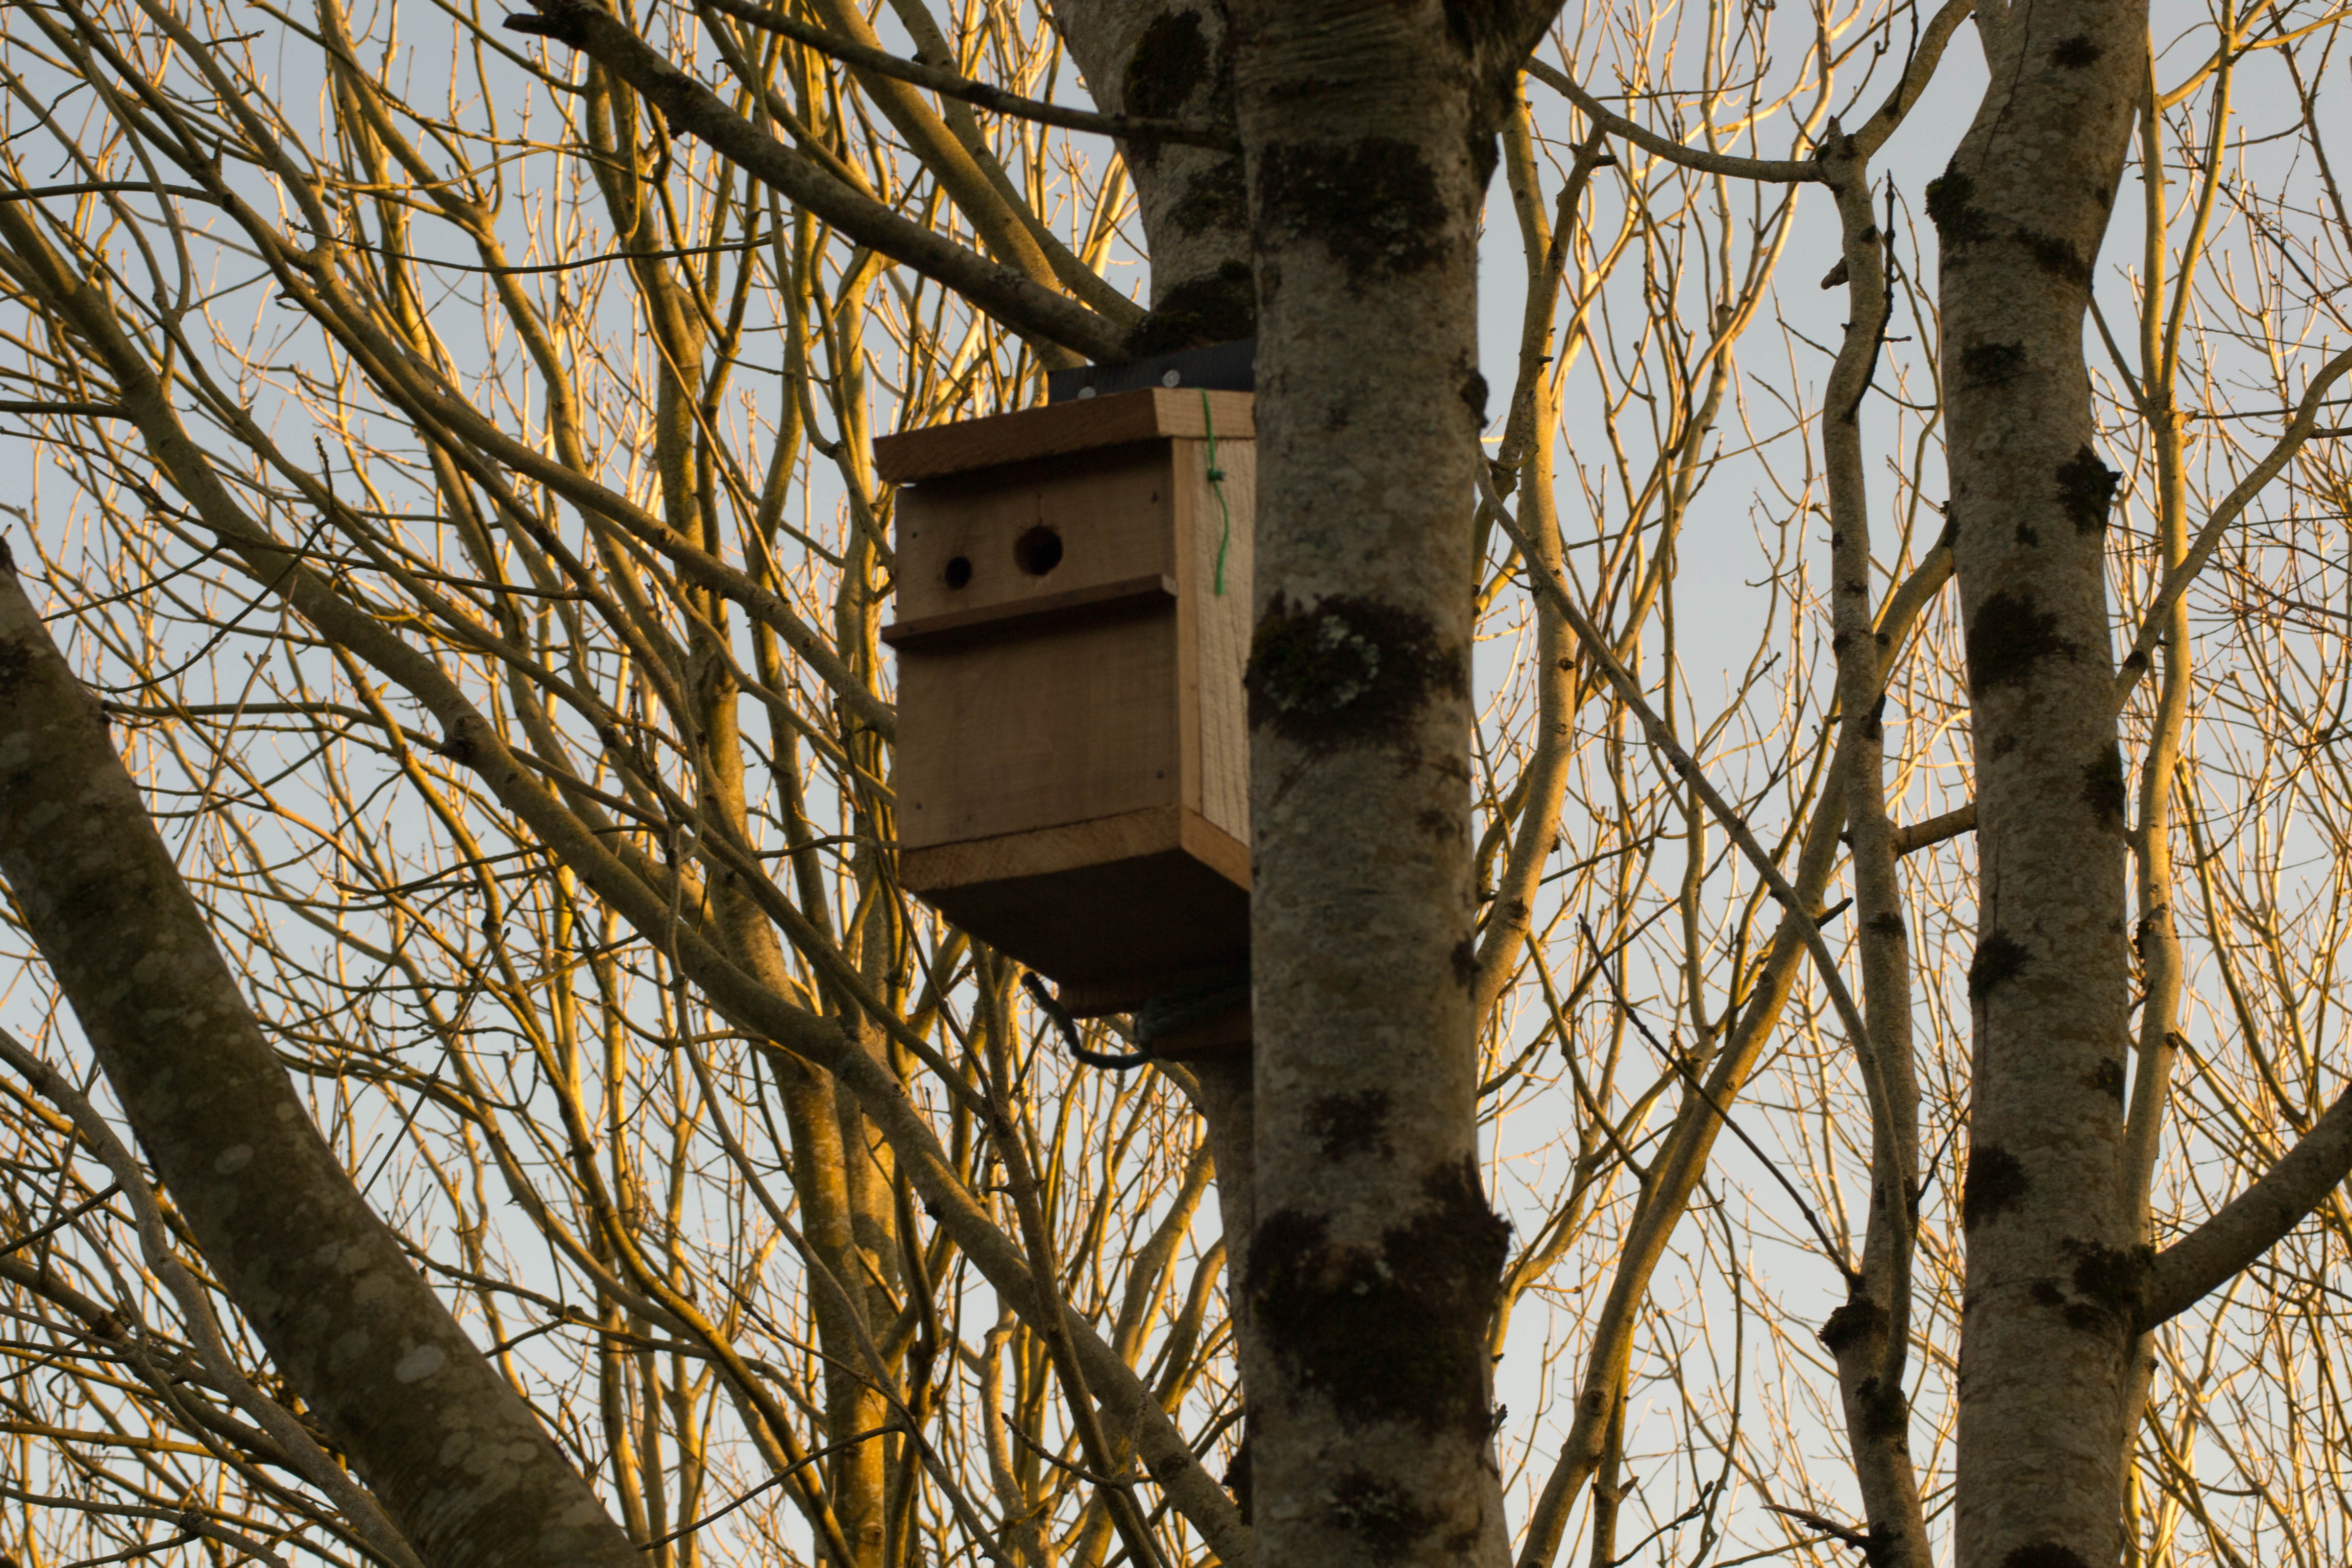 Picture of bird box in the trees